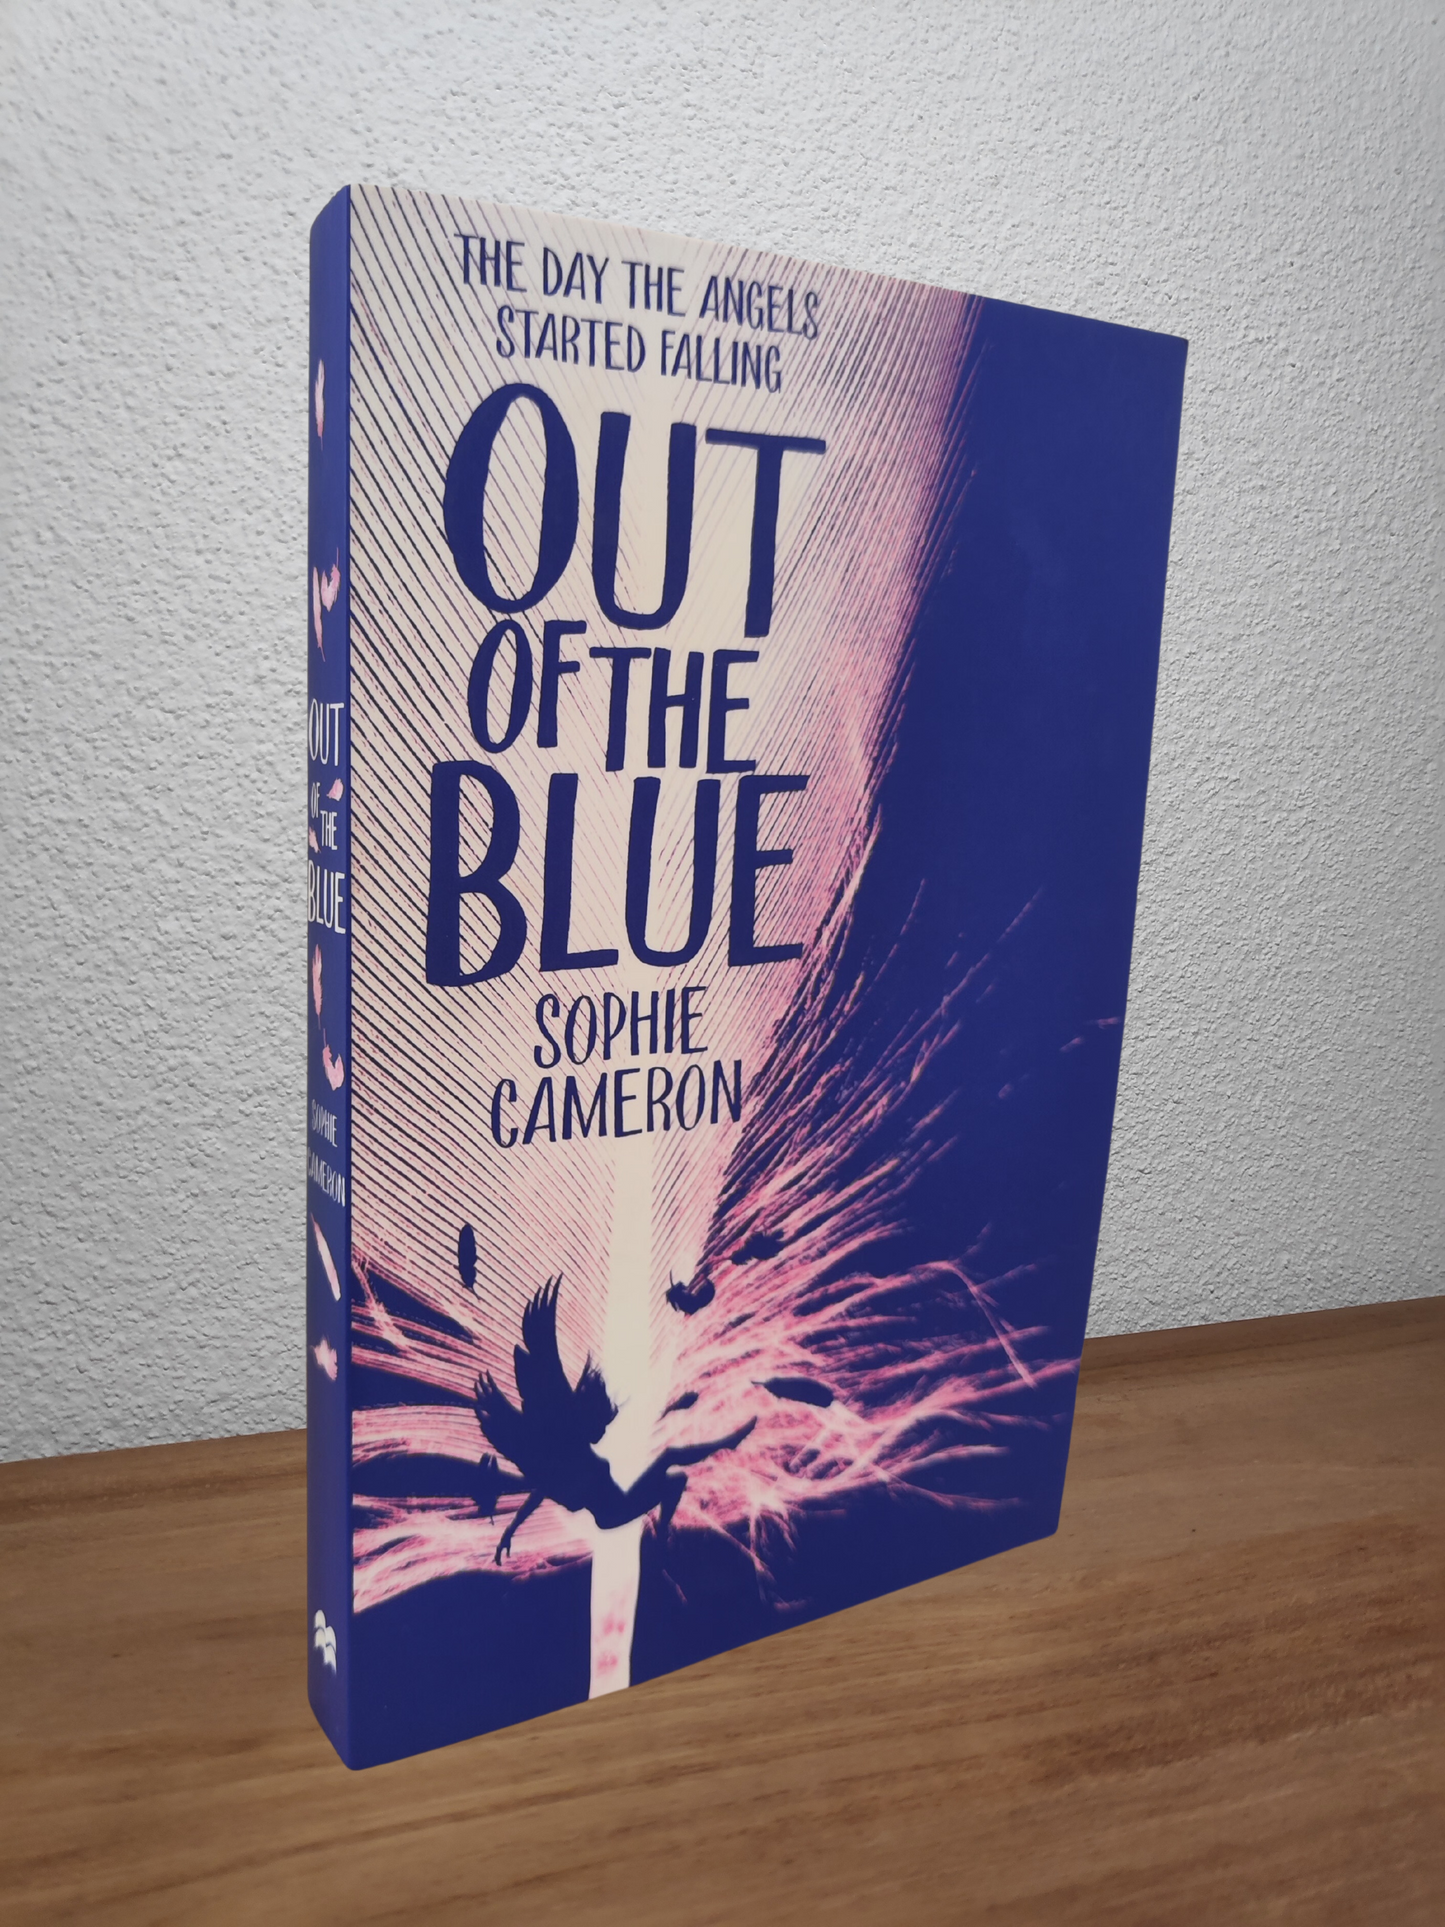 Sophie Cameron - Out of the Blue